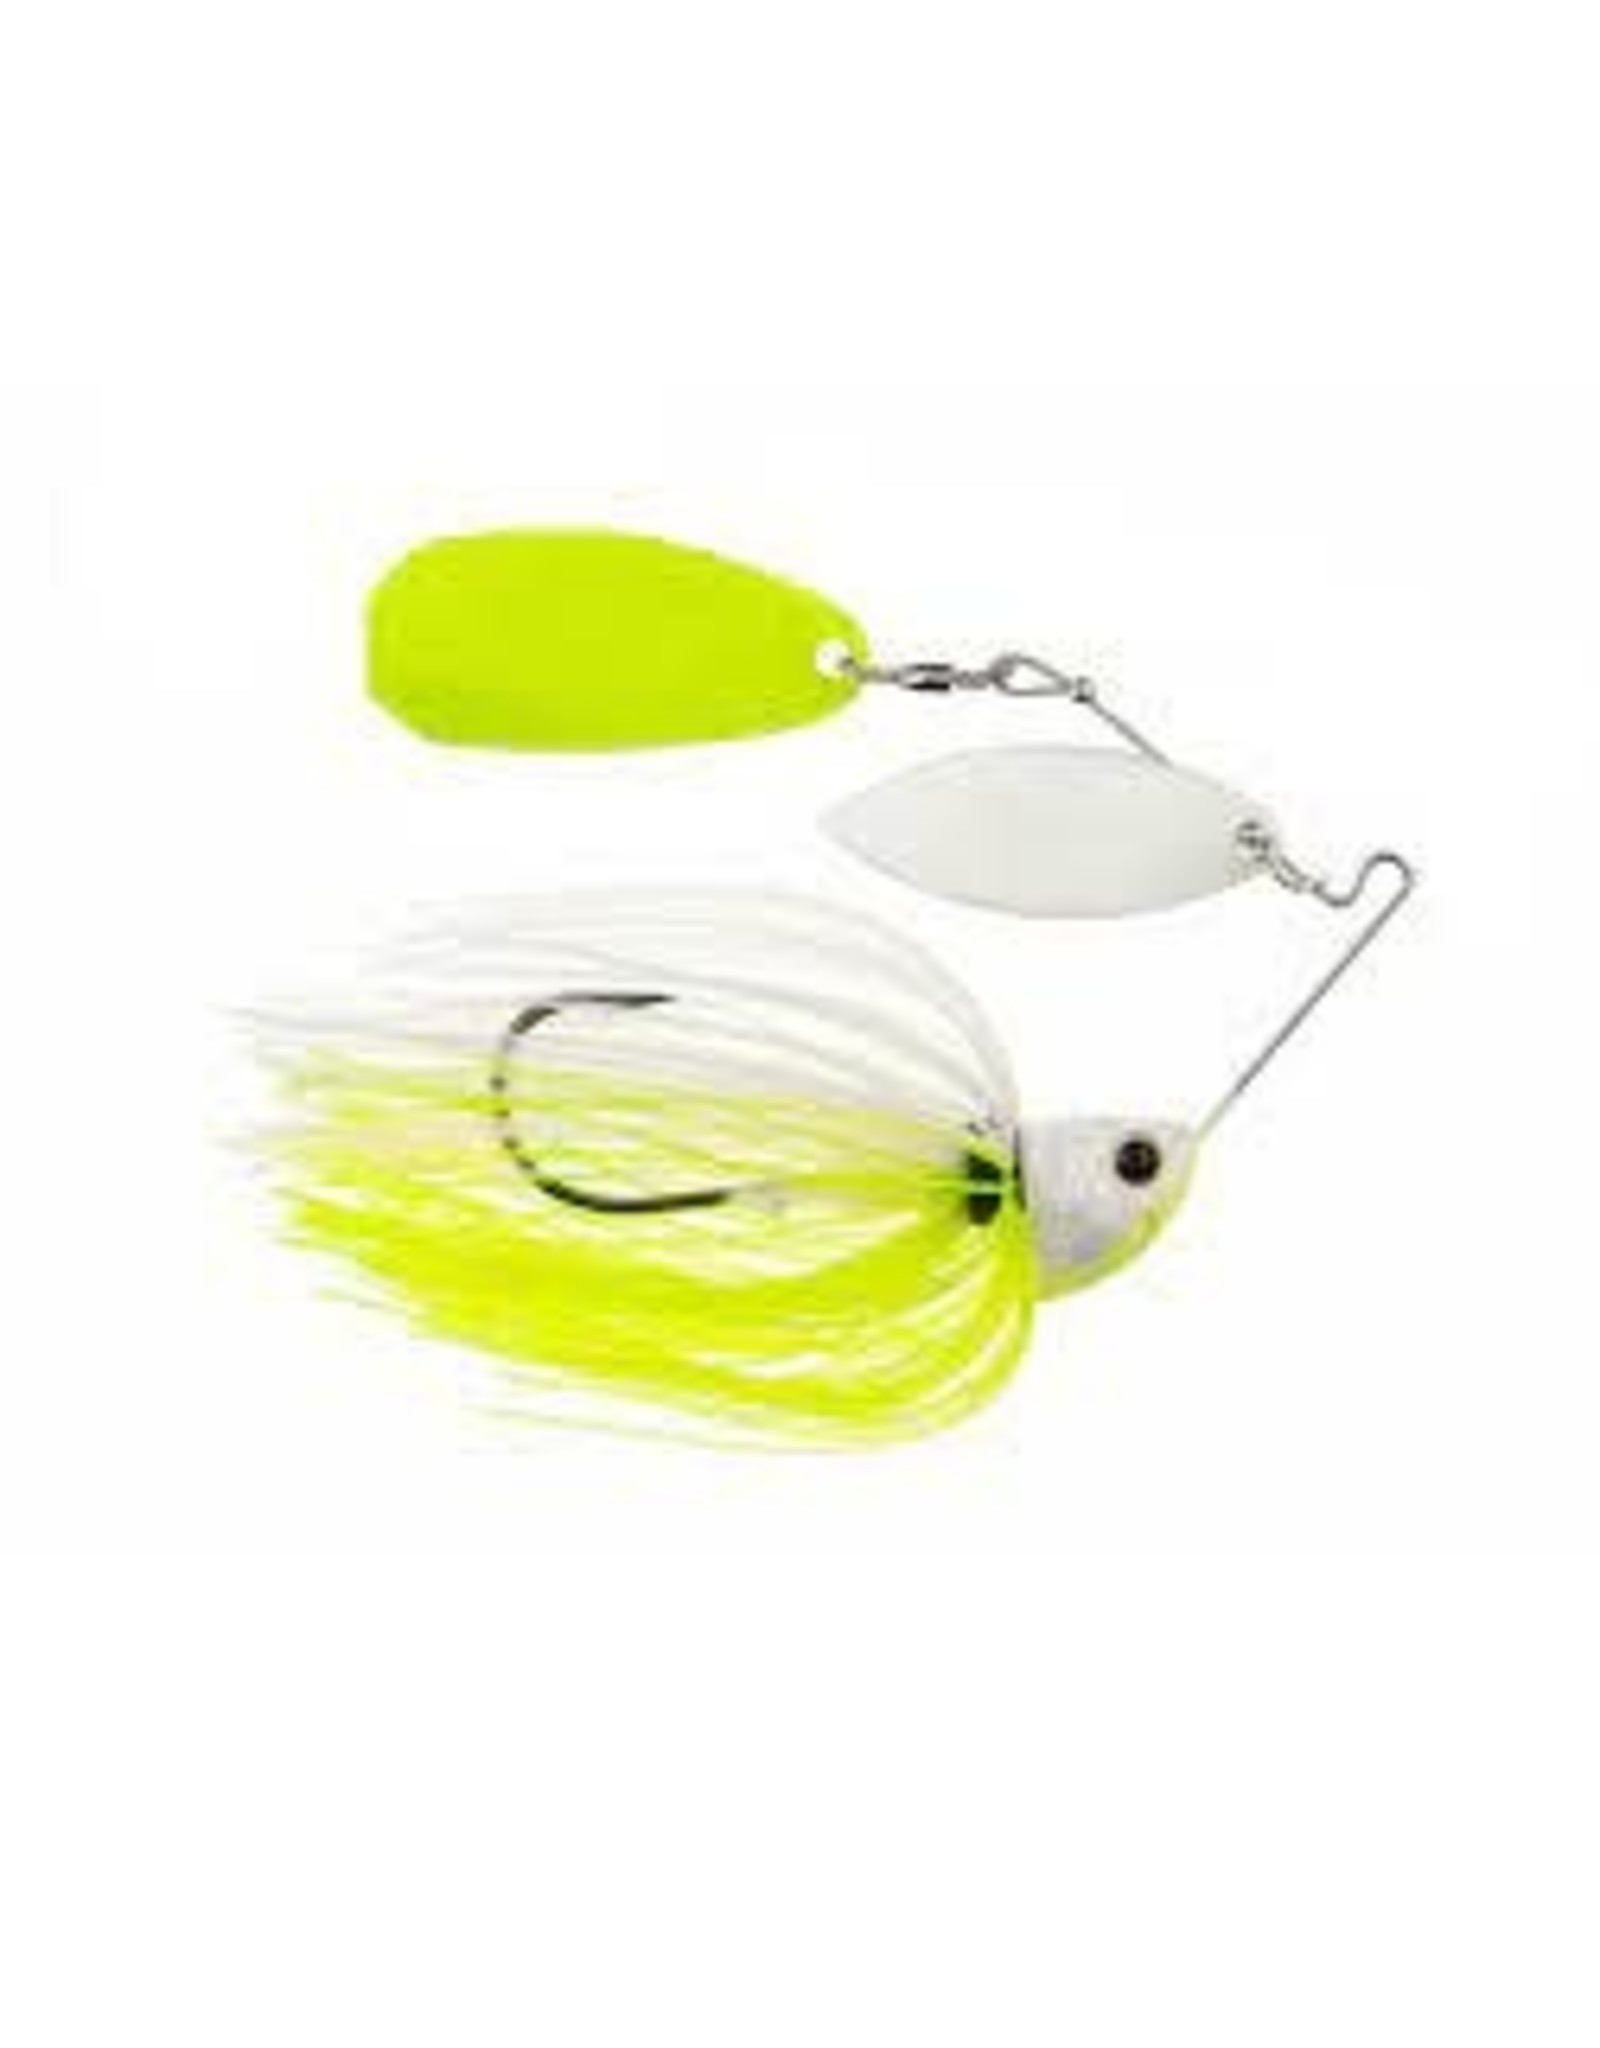 Freedom Freedom Tackle - Speed Freak Full Frame Spinnerbait - Chartreuse Pearl 3/4 oz